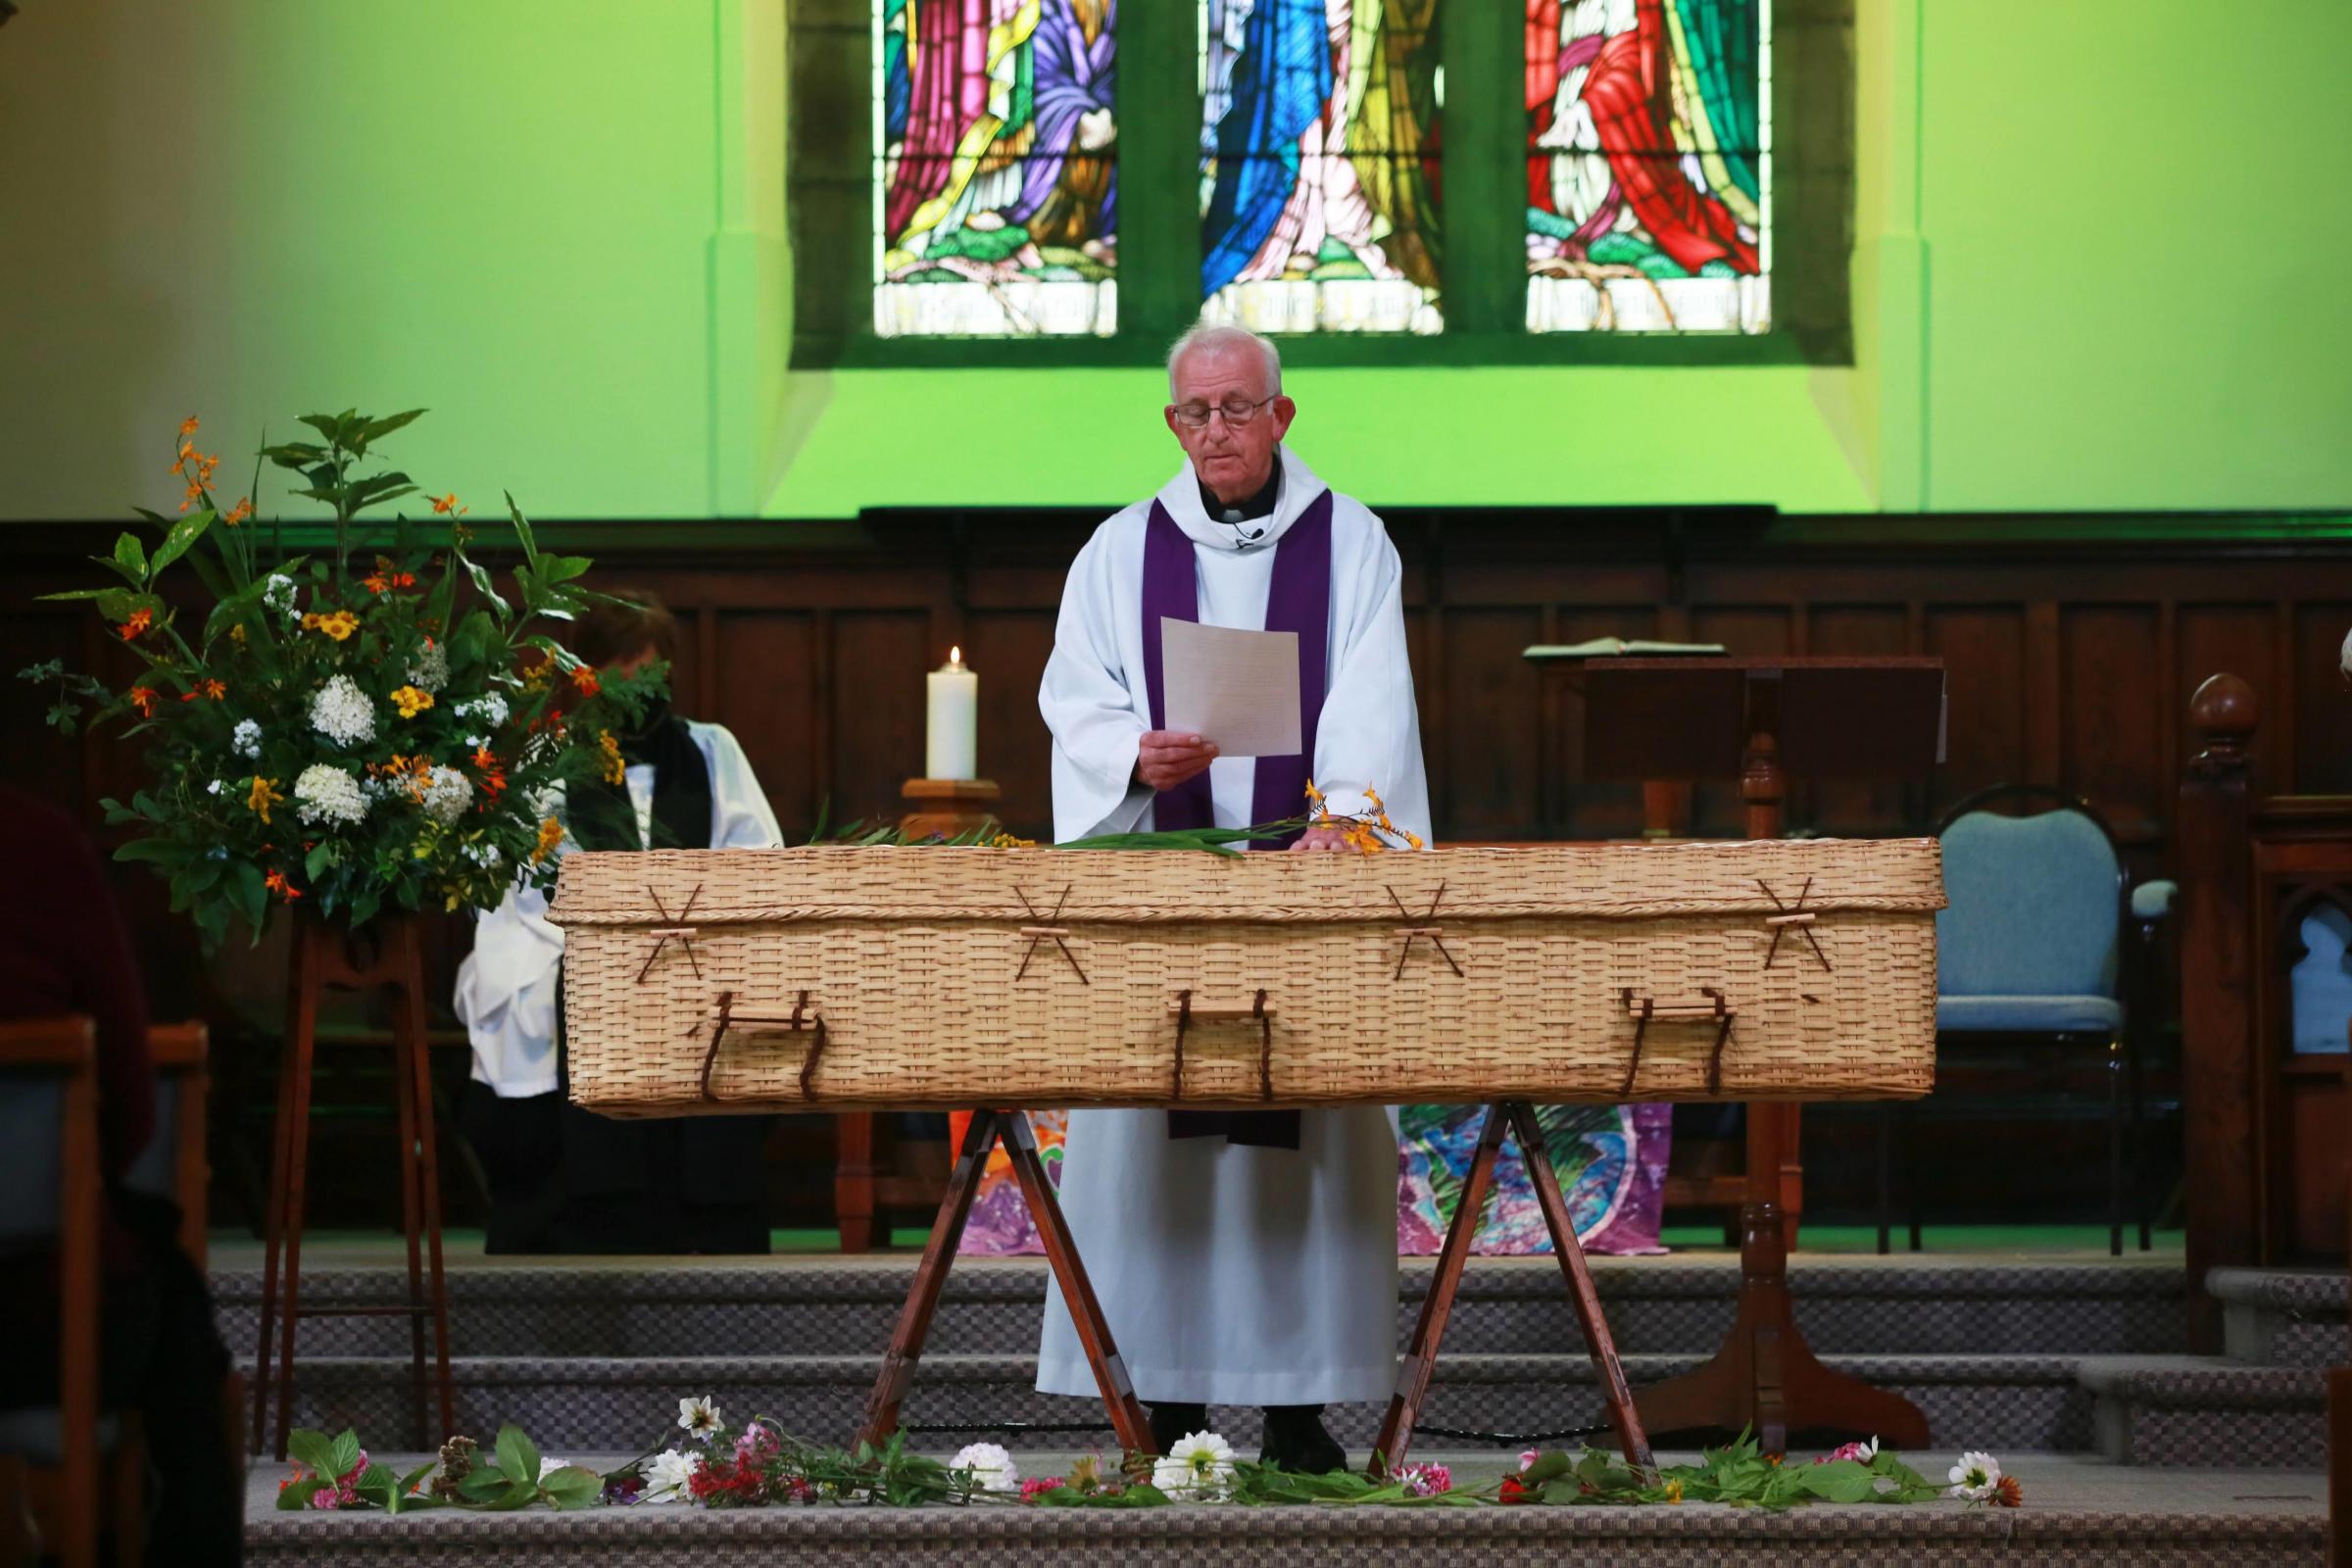 Bishop Auckland Methodist in Bishop Auckland held a funeral service to mourn the loss of biodiversity and climate change pictured Dennis Tindall Catholic Priest Picture: SARAH CALDECOTT